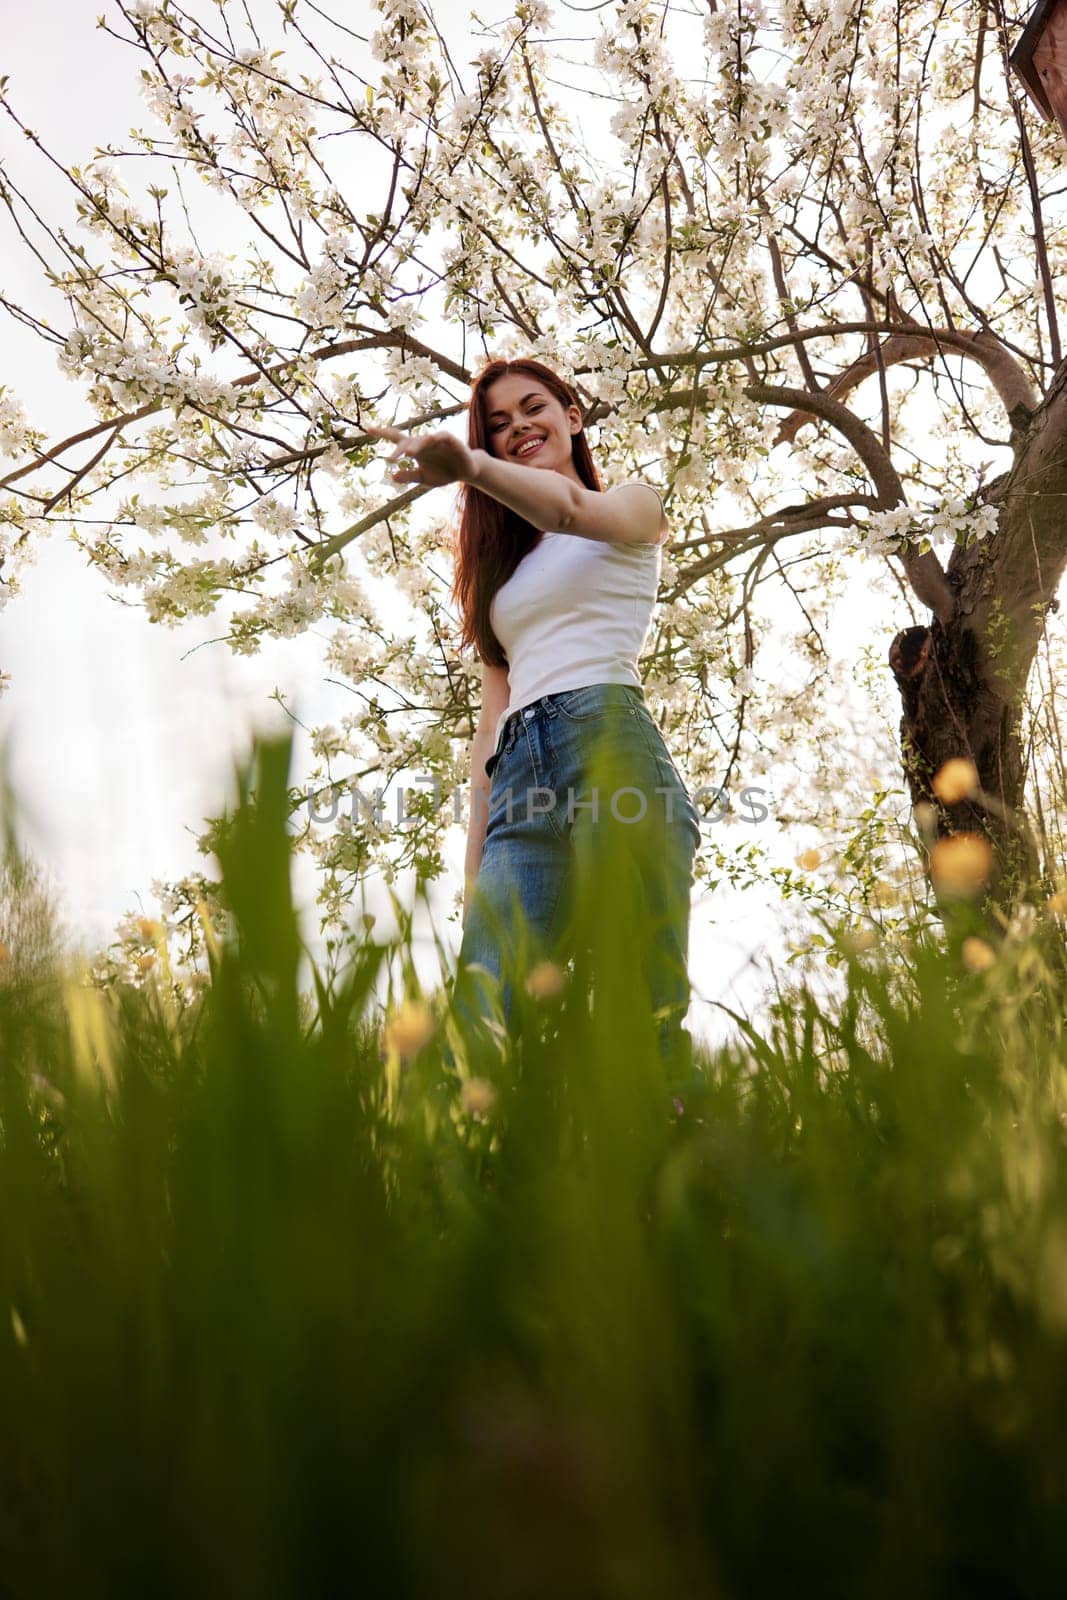 cute woman in light clothes posing next to a flowering tree in the countryside. High quality photo